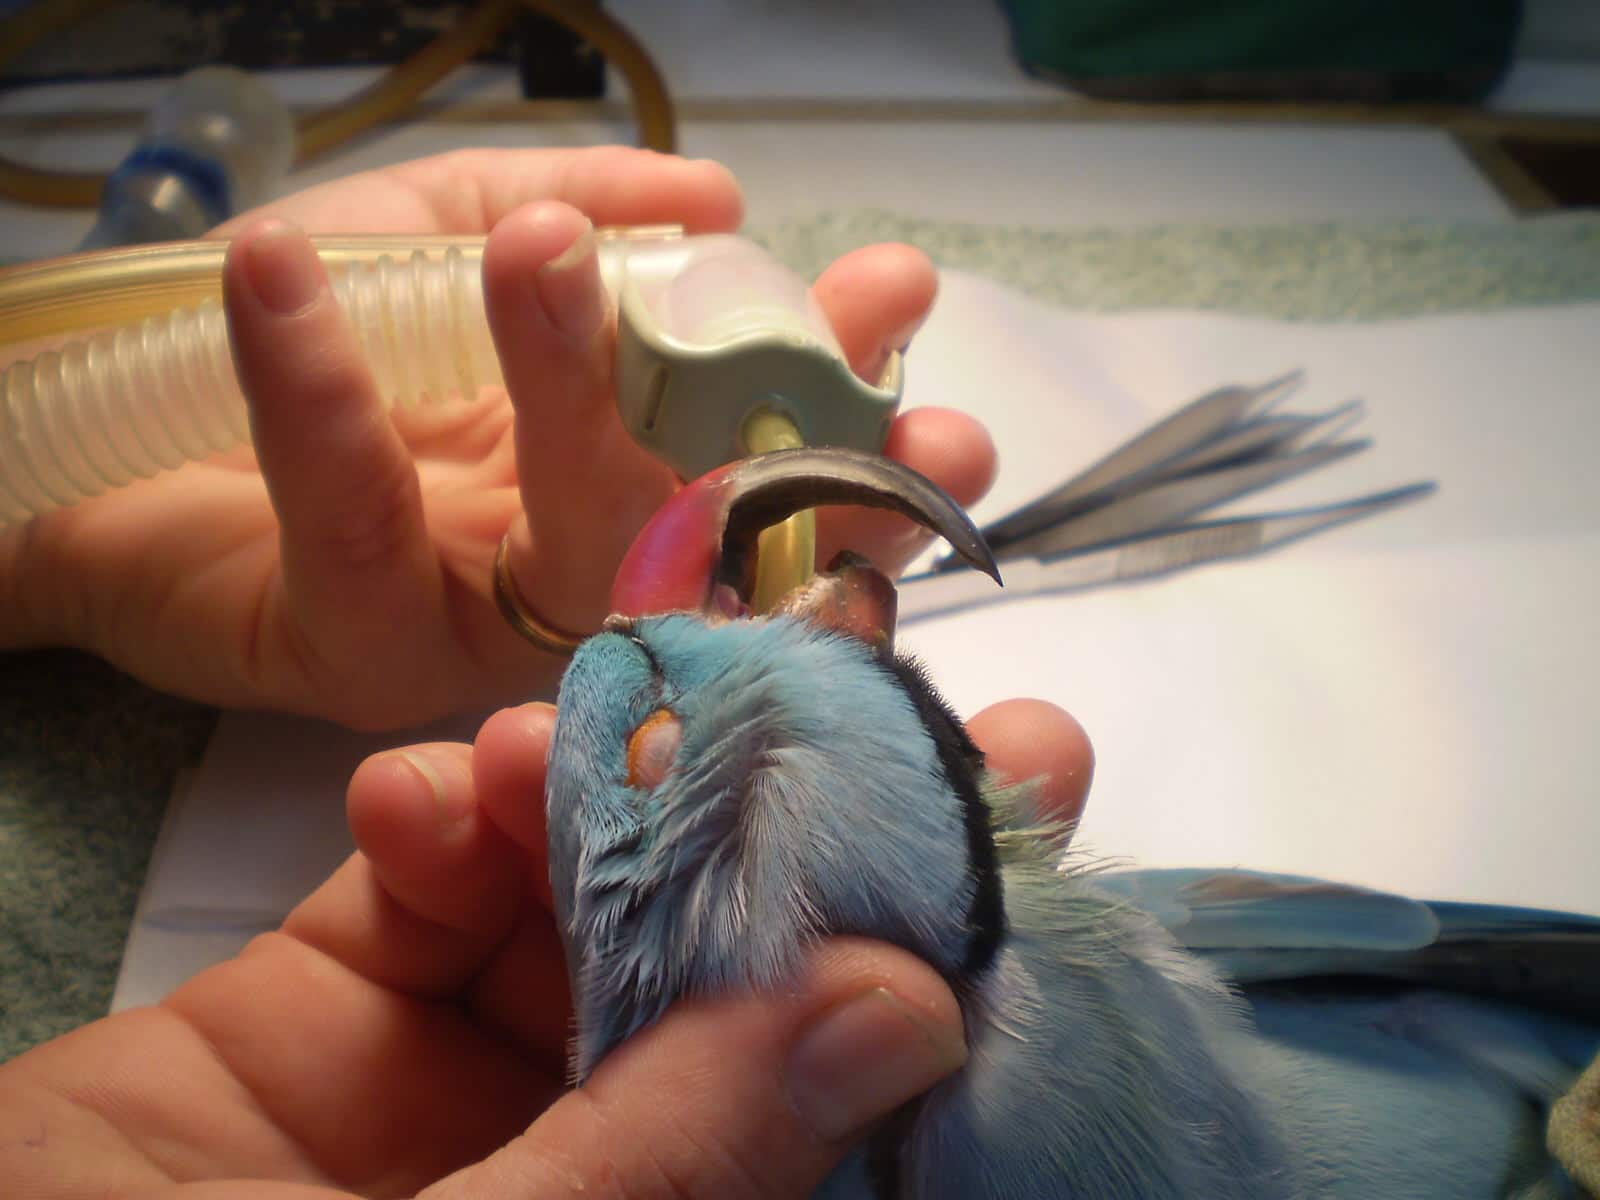 Trimming Beaks and Claws - What You Need to Know